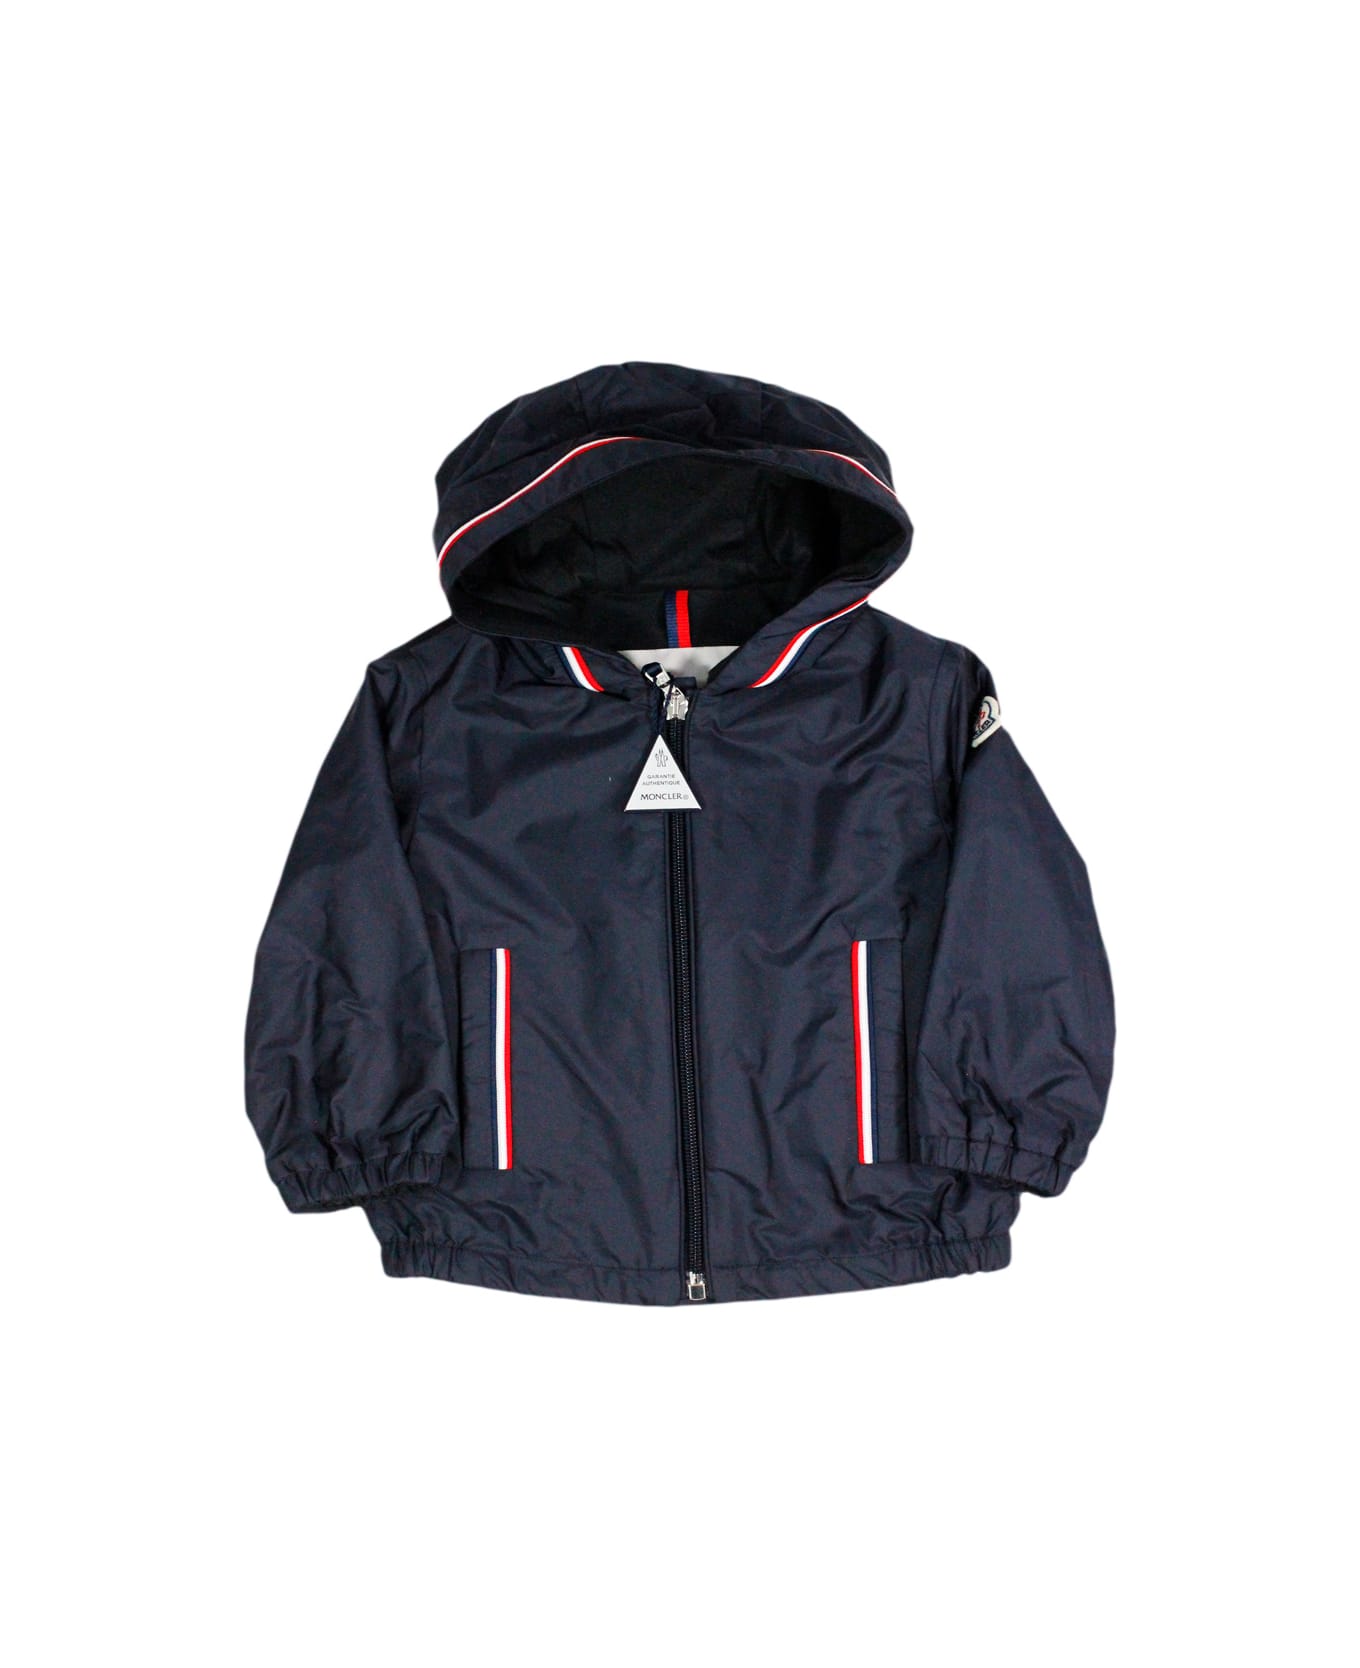 Moncler Windproof Jacket Granduc With Hood And Elasticated Cuffs And Bottom. Zip Closure - Blu